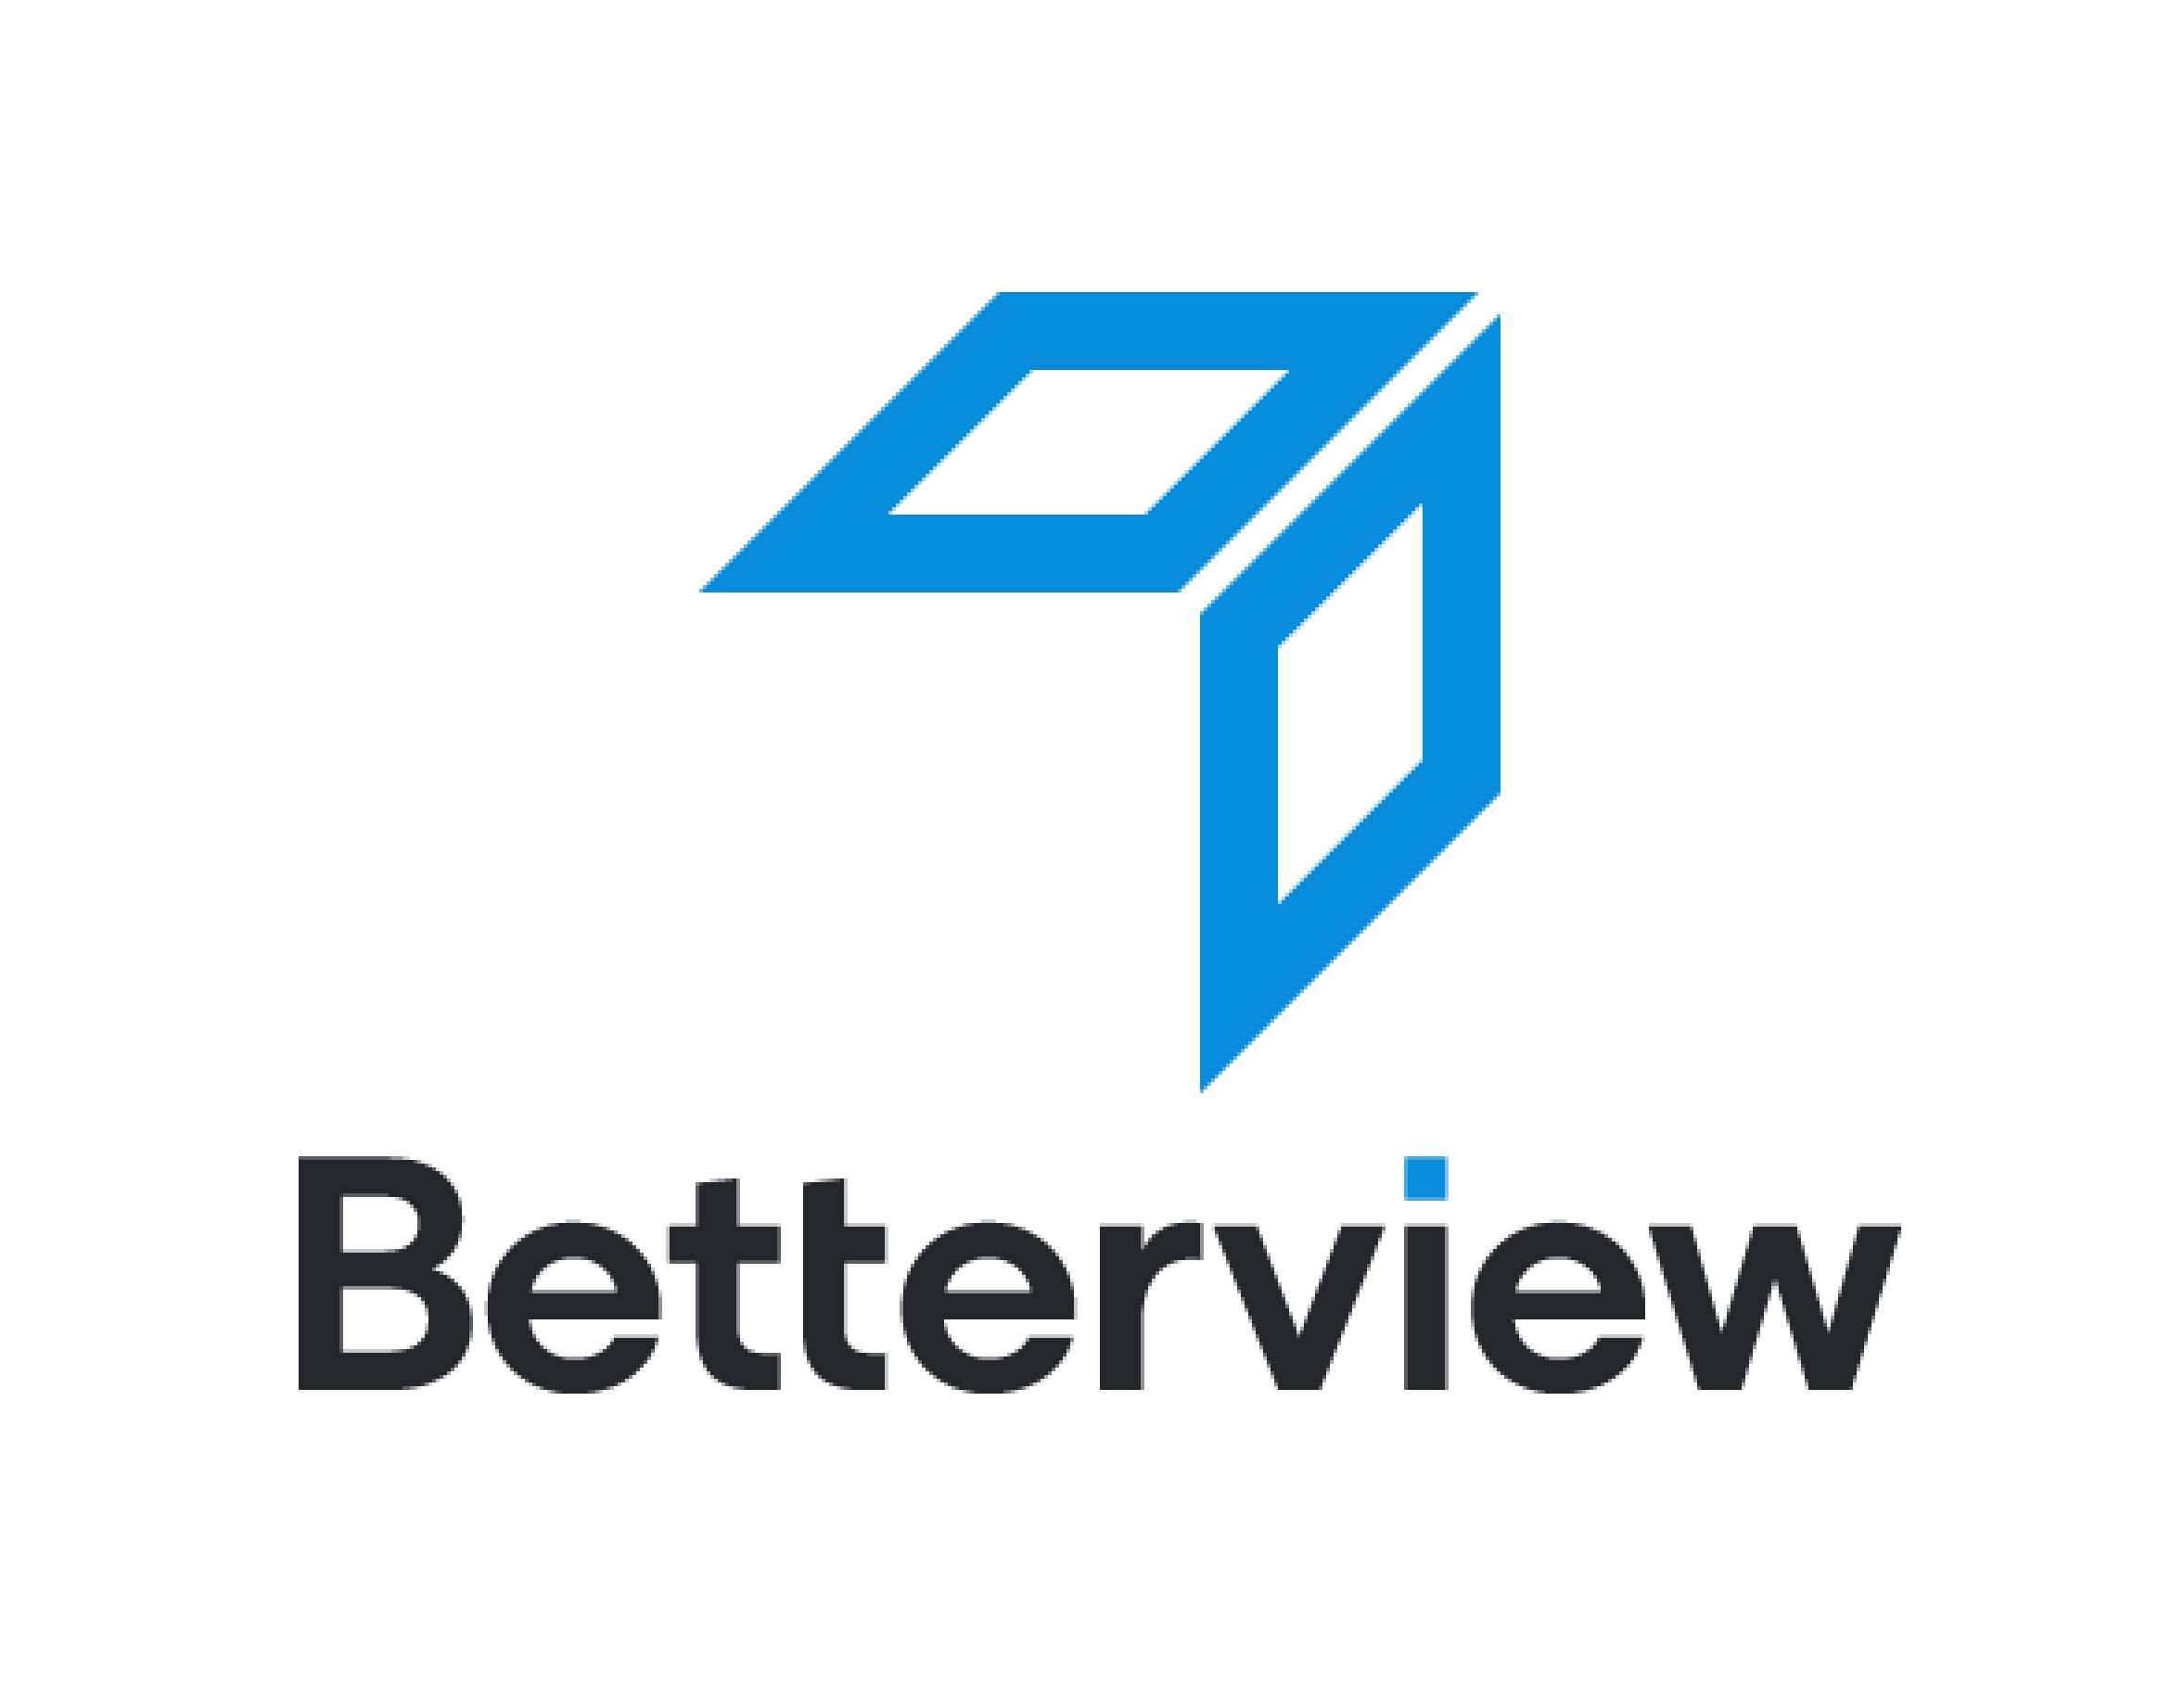 InsurTech Startup Betterview Partners with CIS Group to Provide UAV Software and Services to its National Network of Field Inspectors